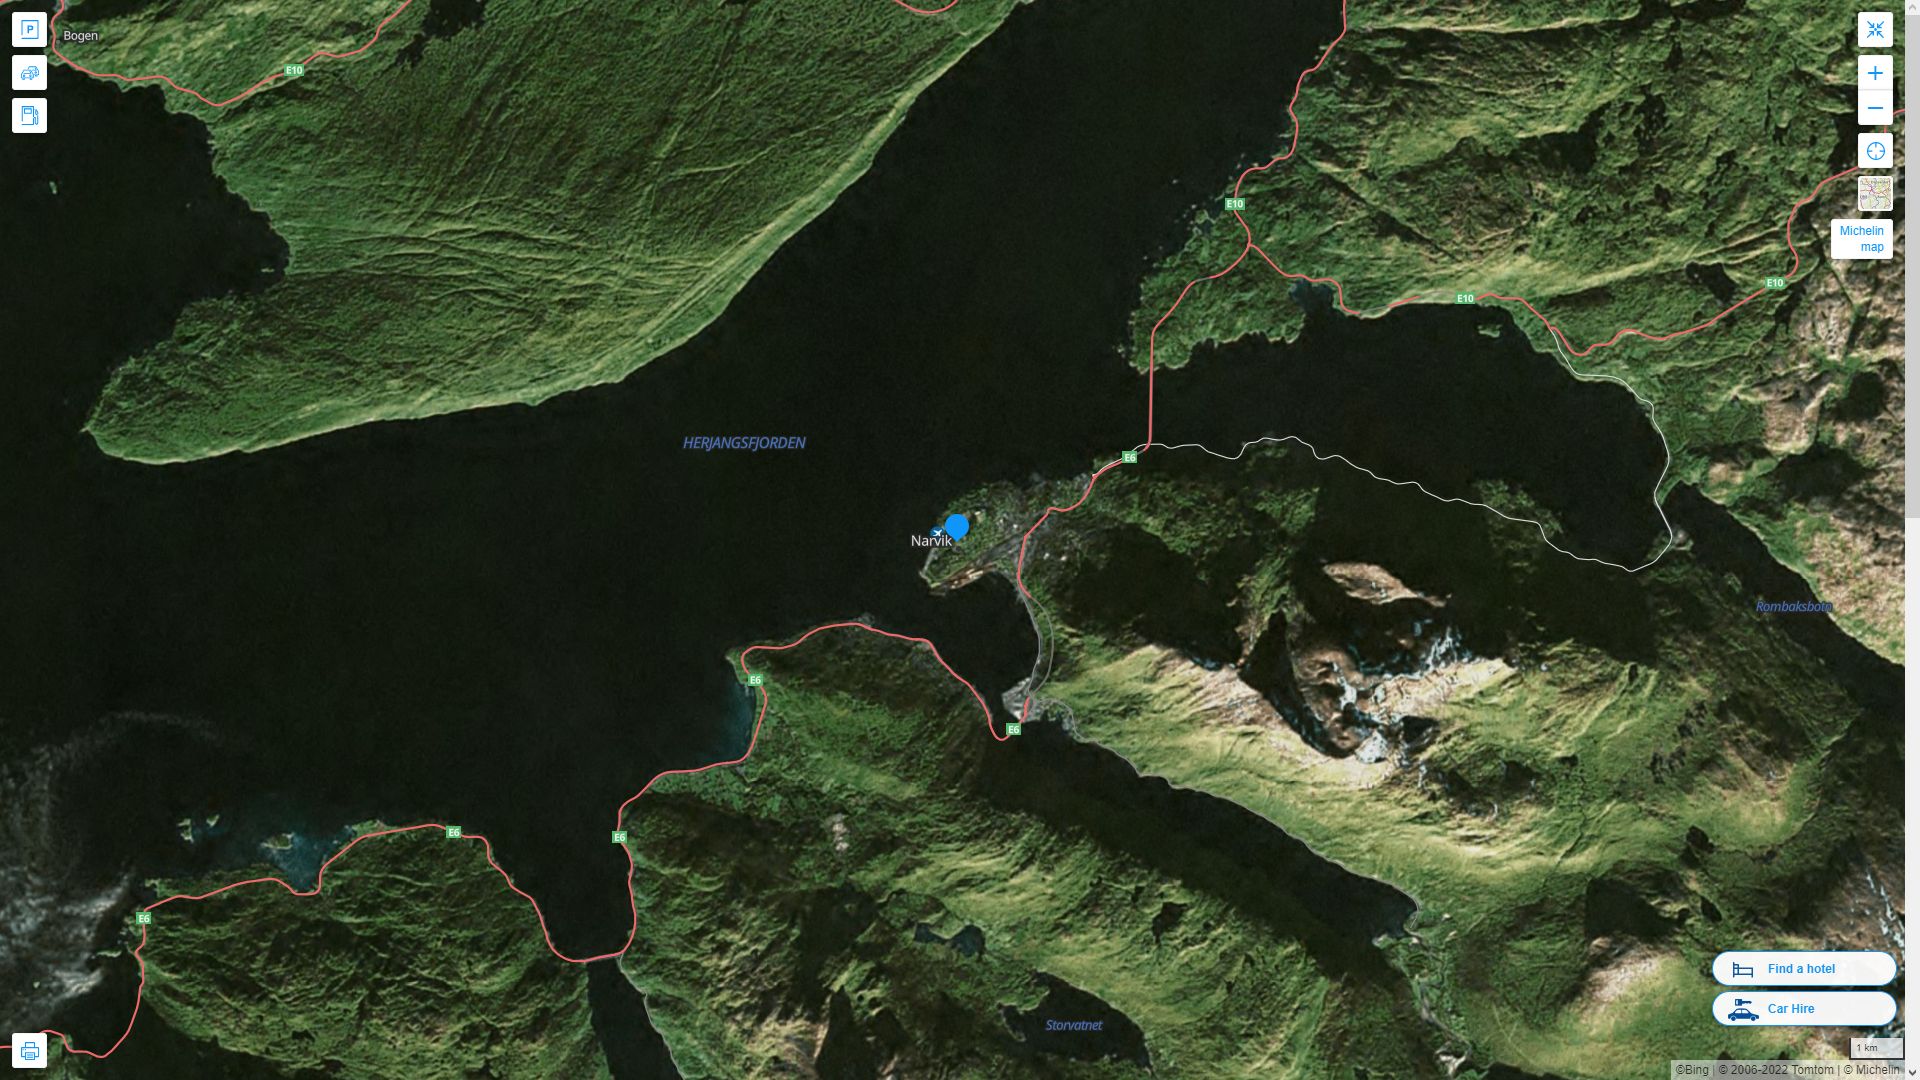 Narvik Highway and Road Map with Satellite View